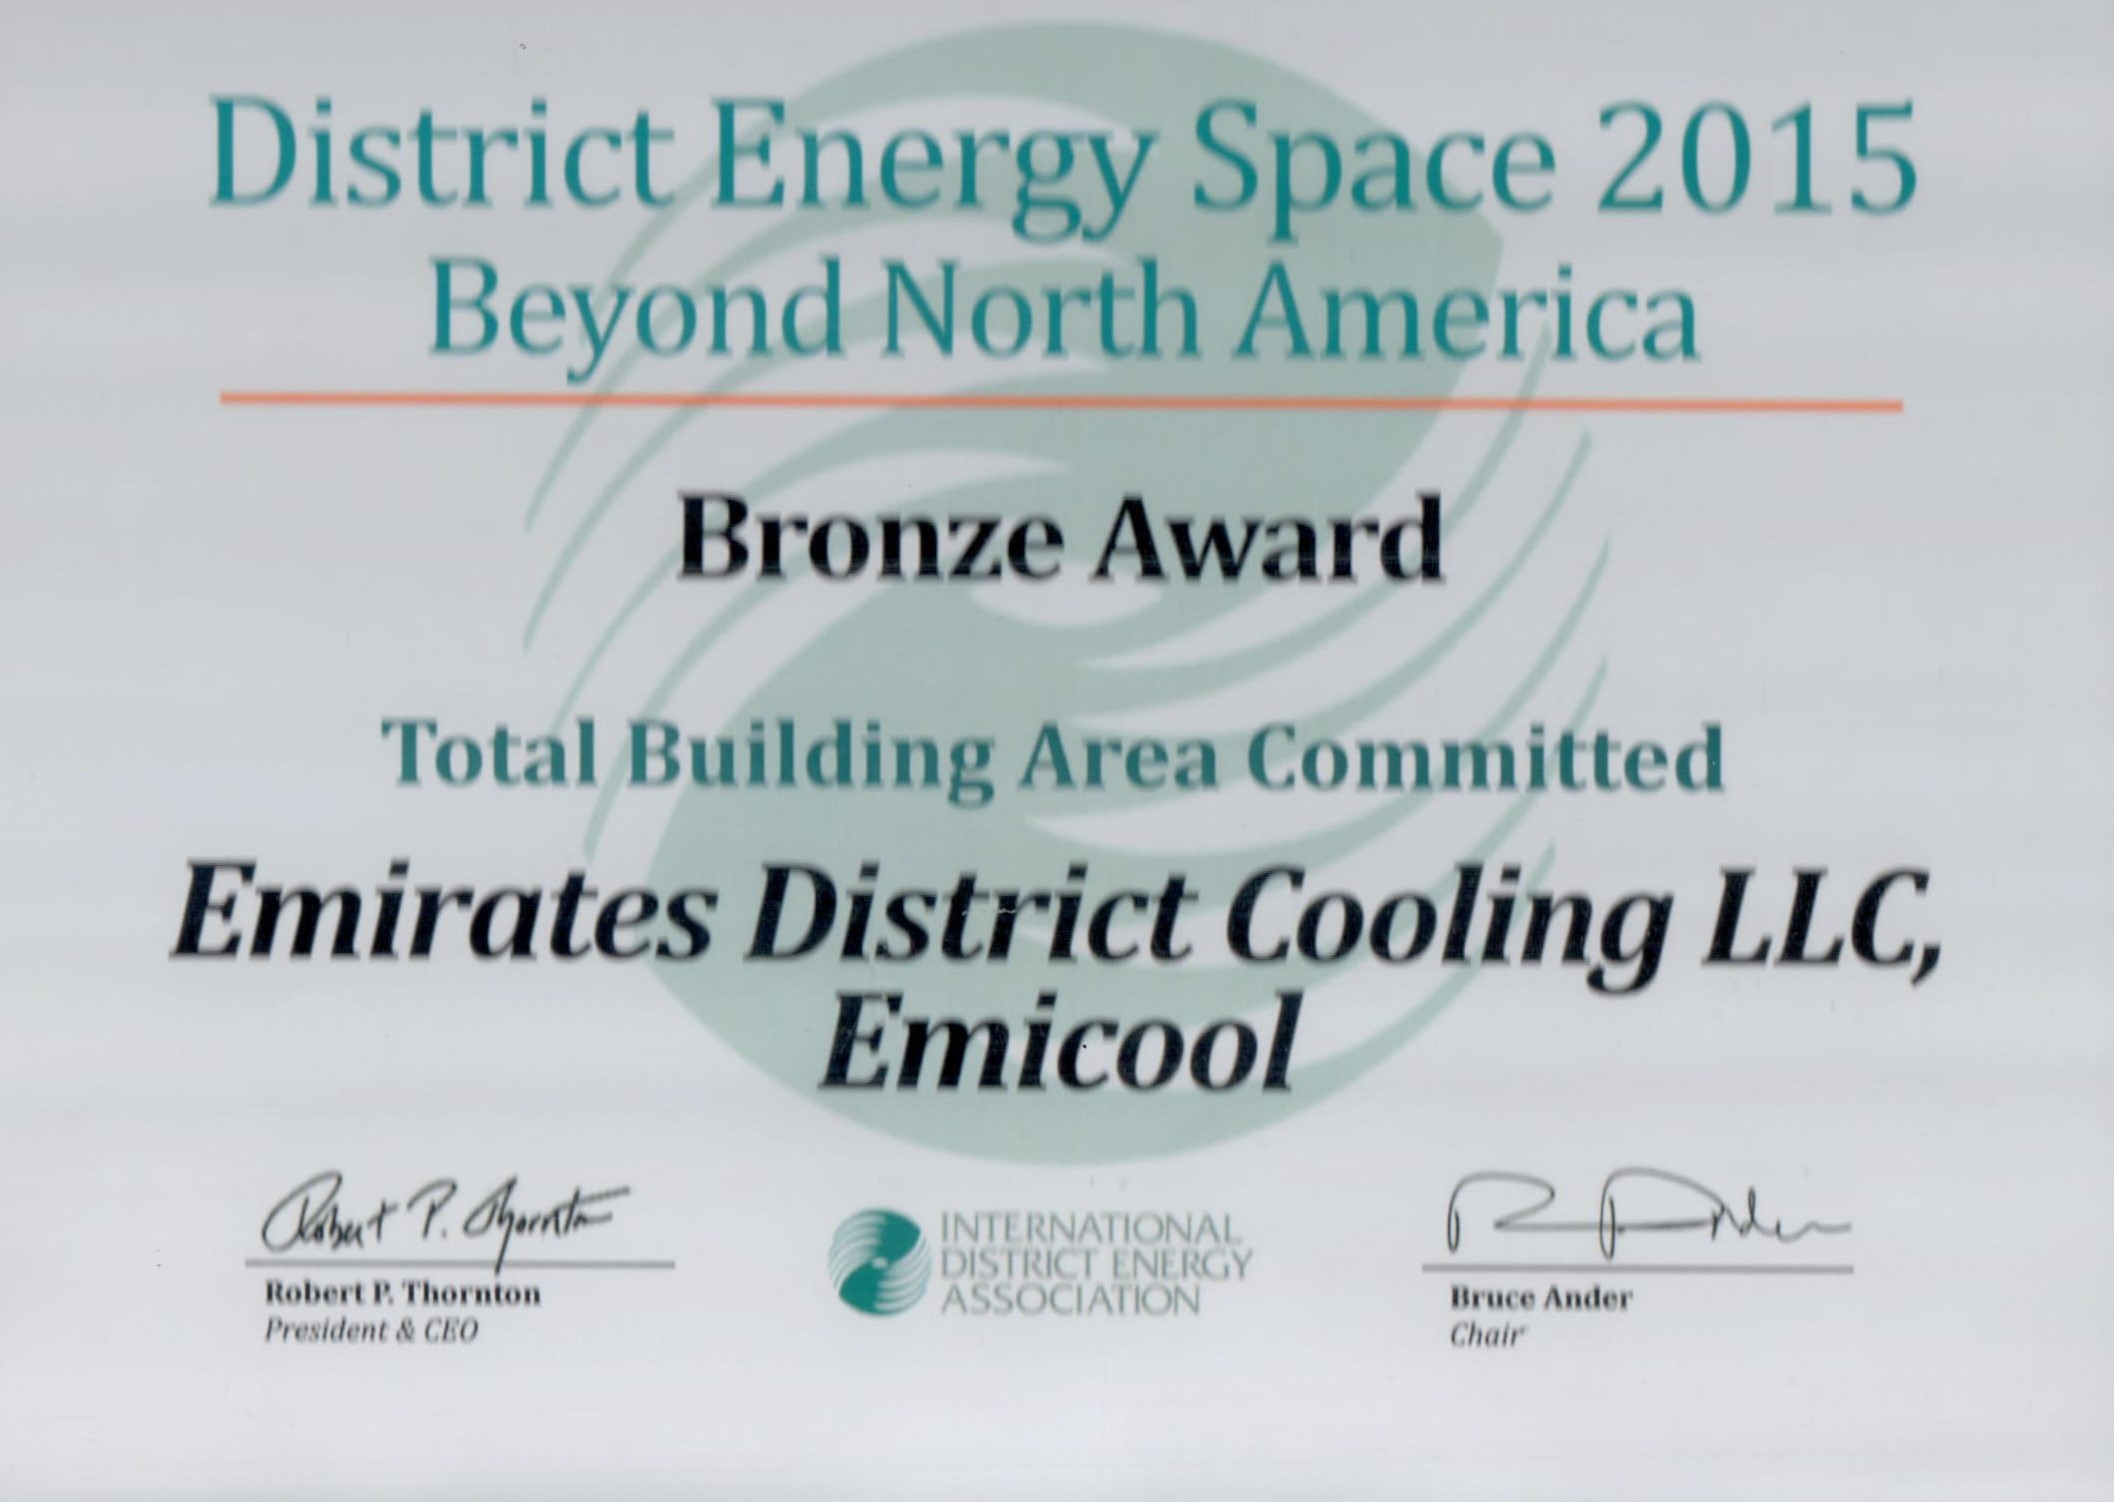 Bronze Award Total Building Area Committed